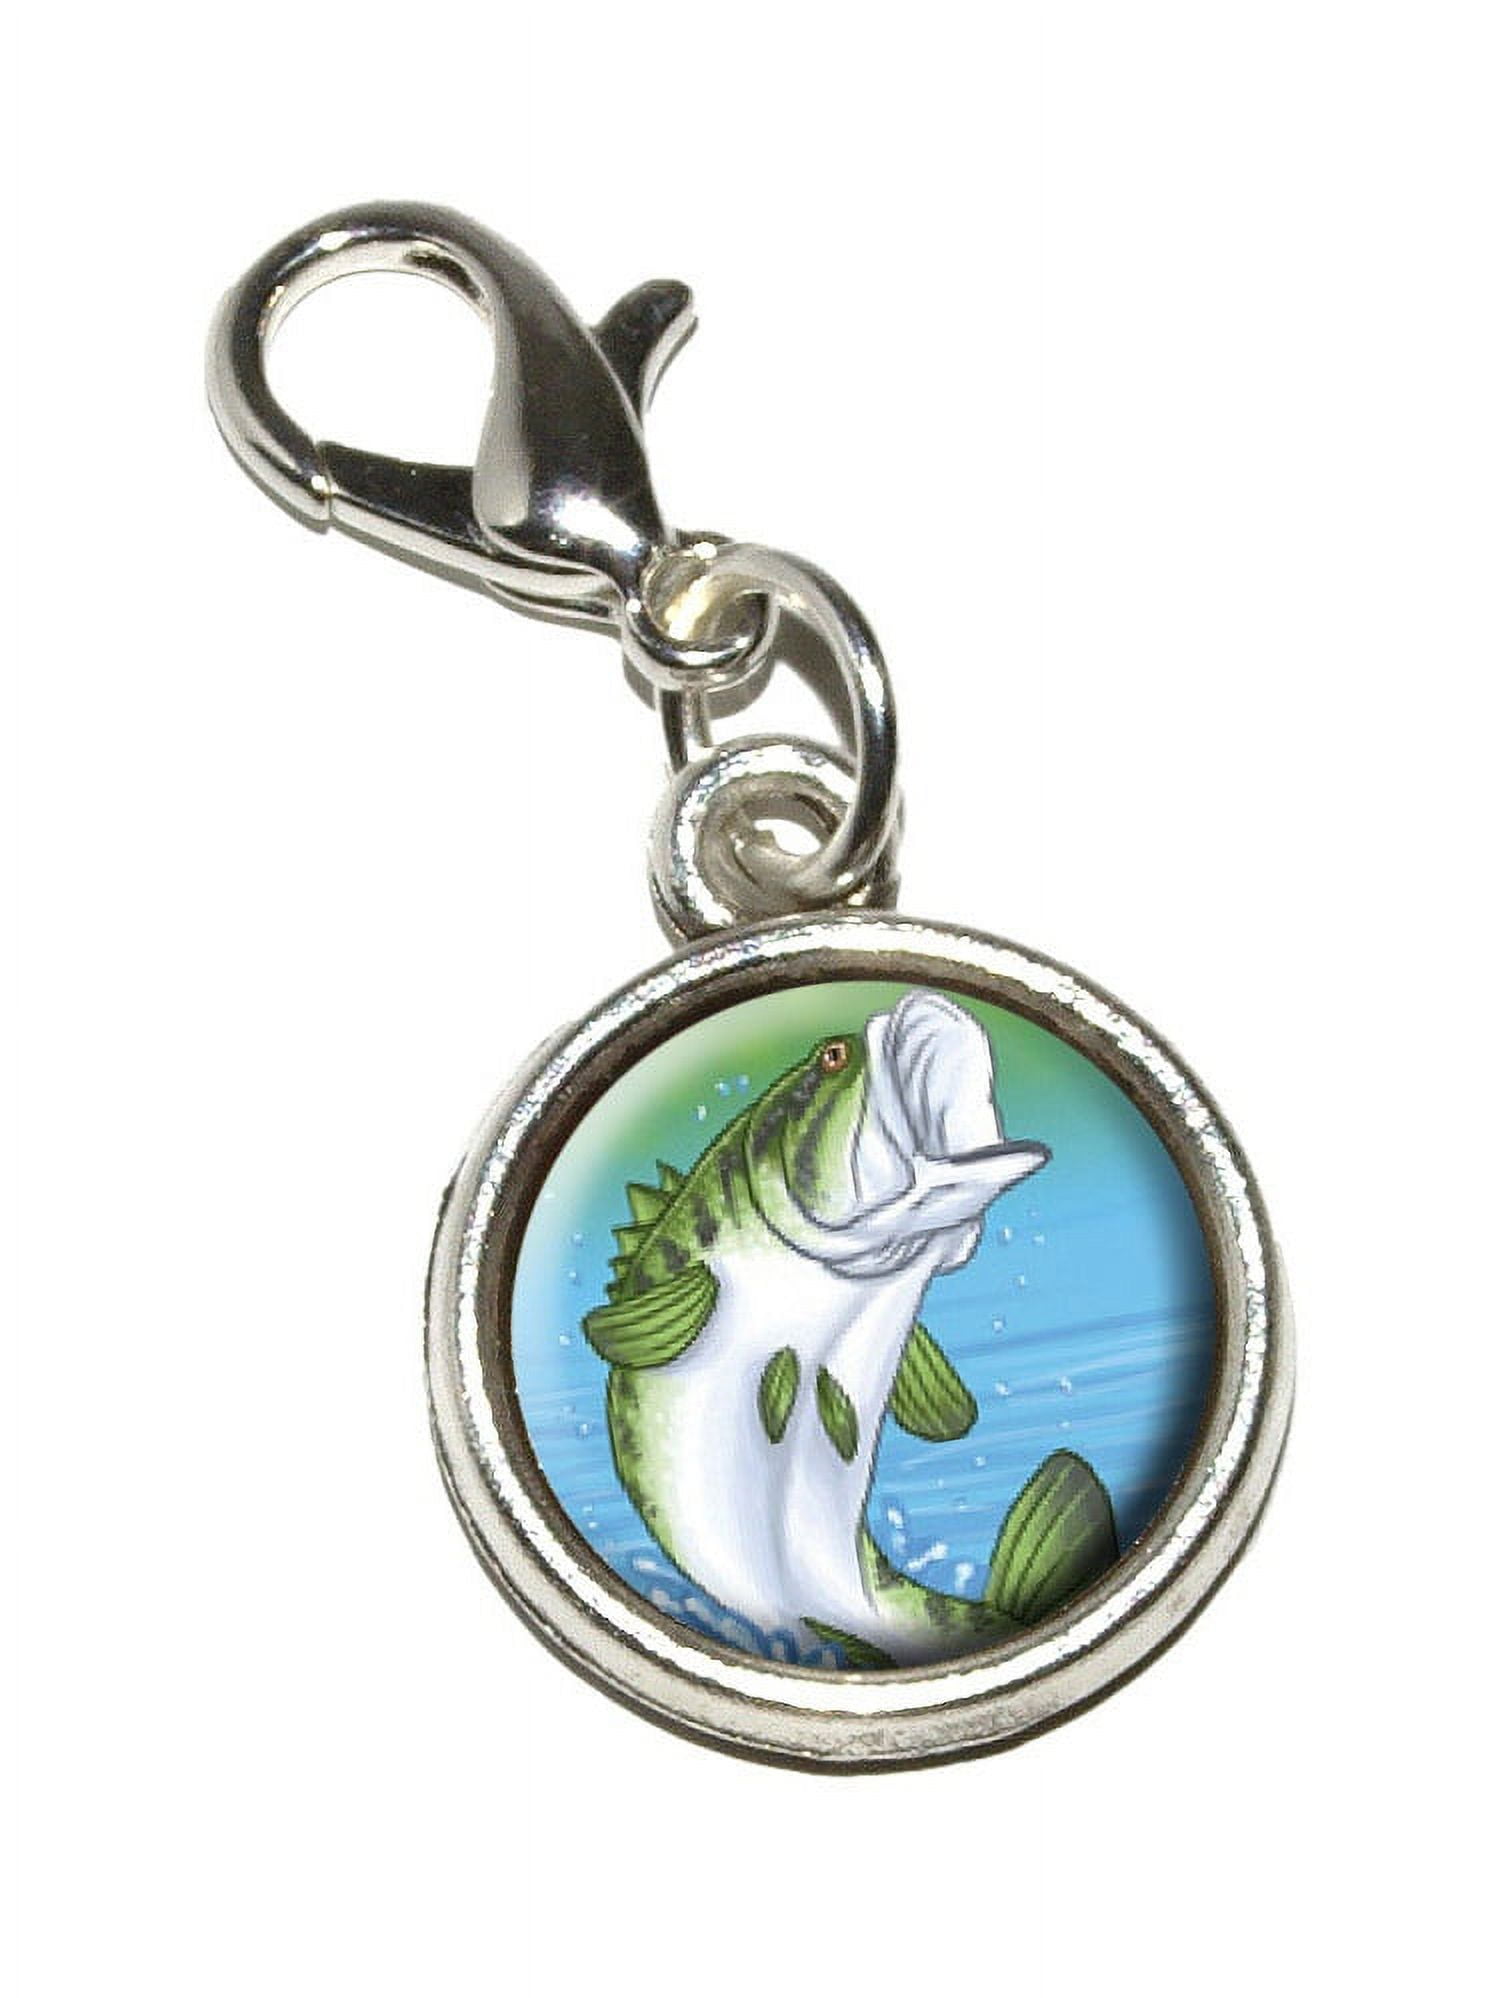 Bass Fish Jumping out of water - Fishing Bracelet Charm